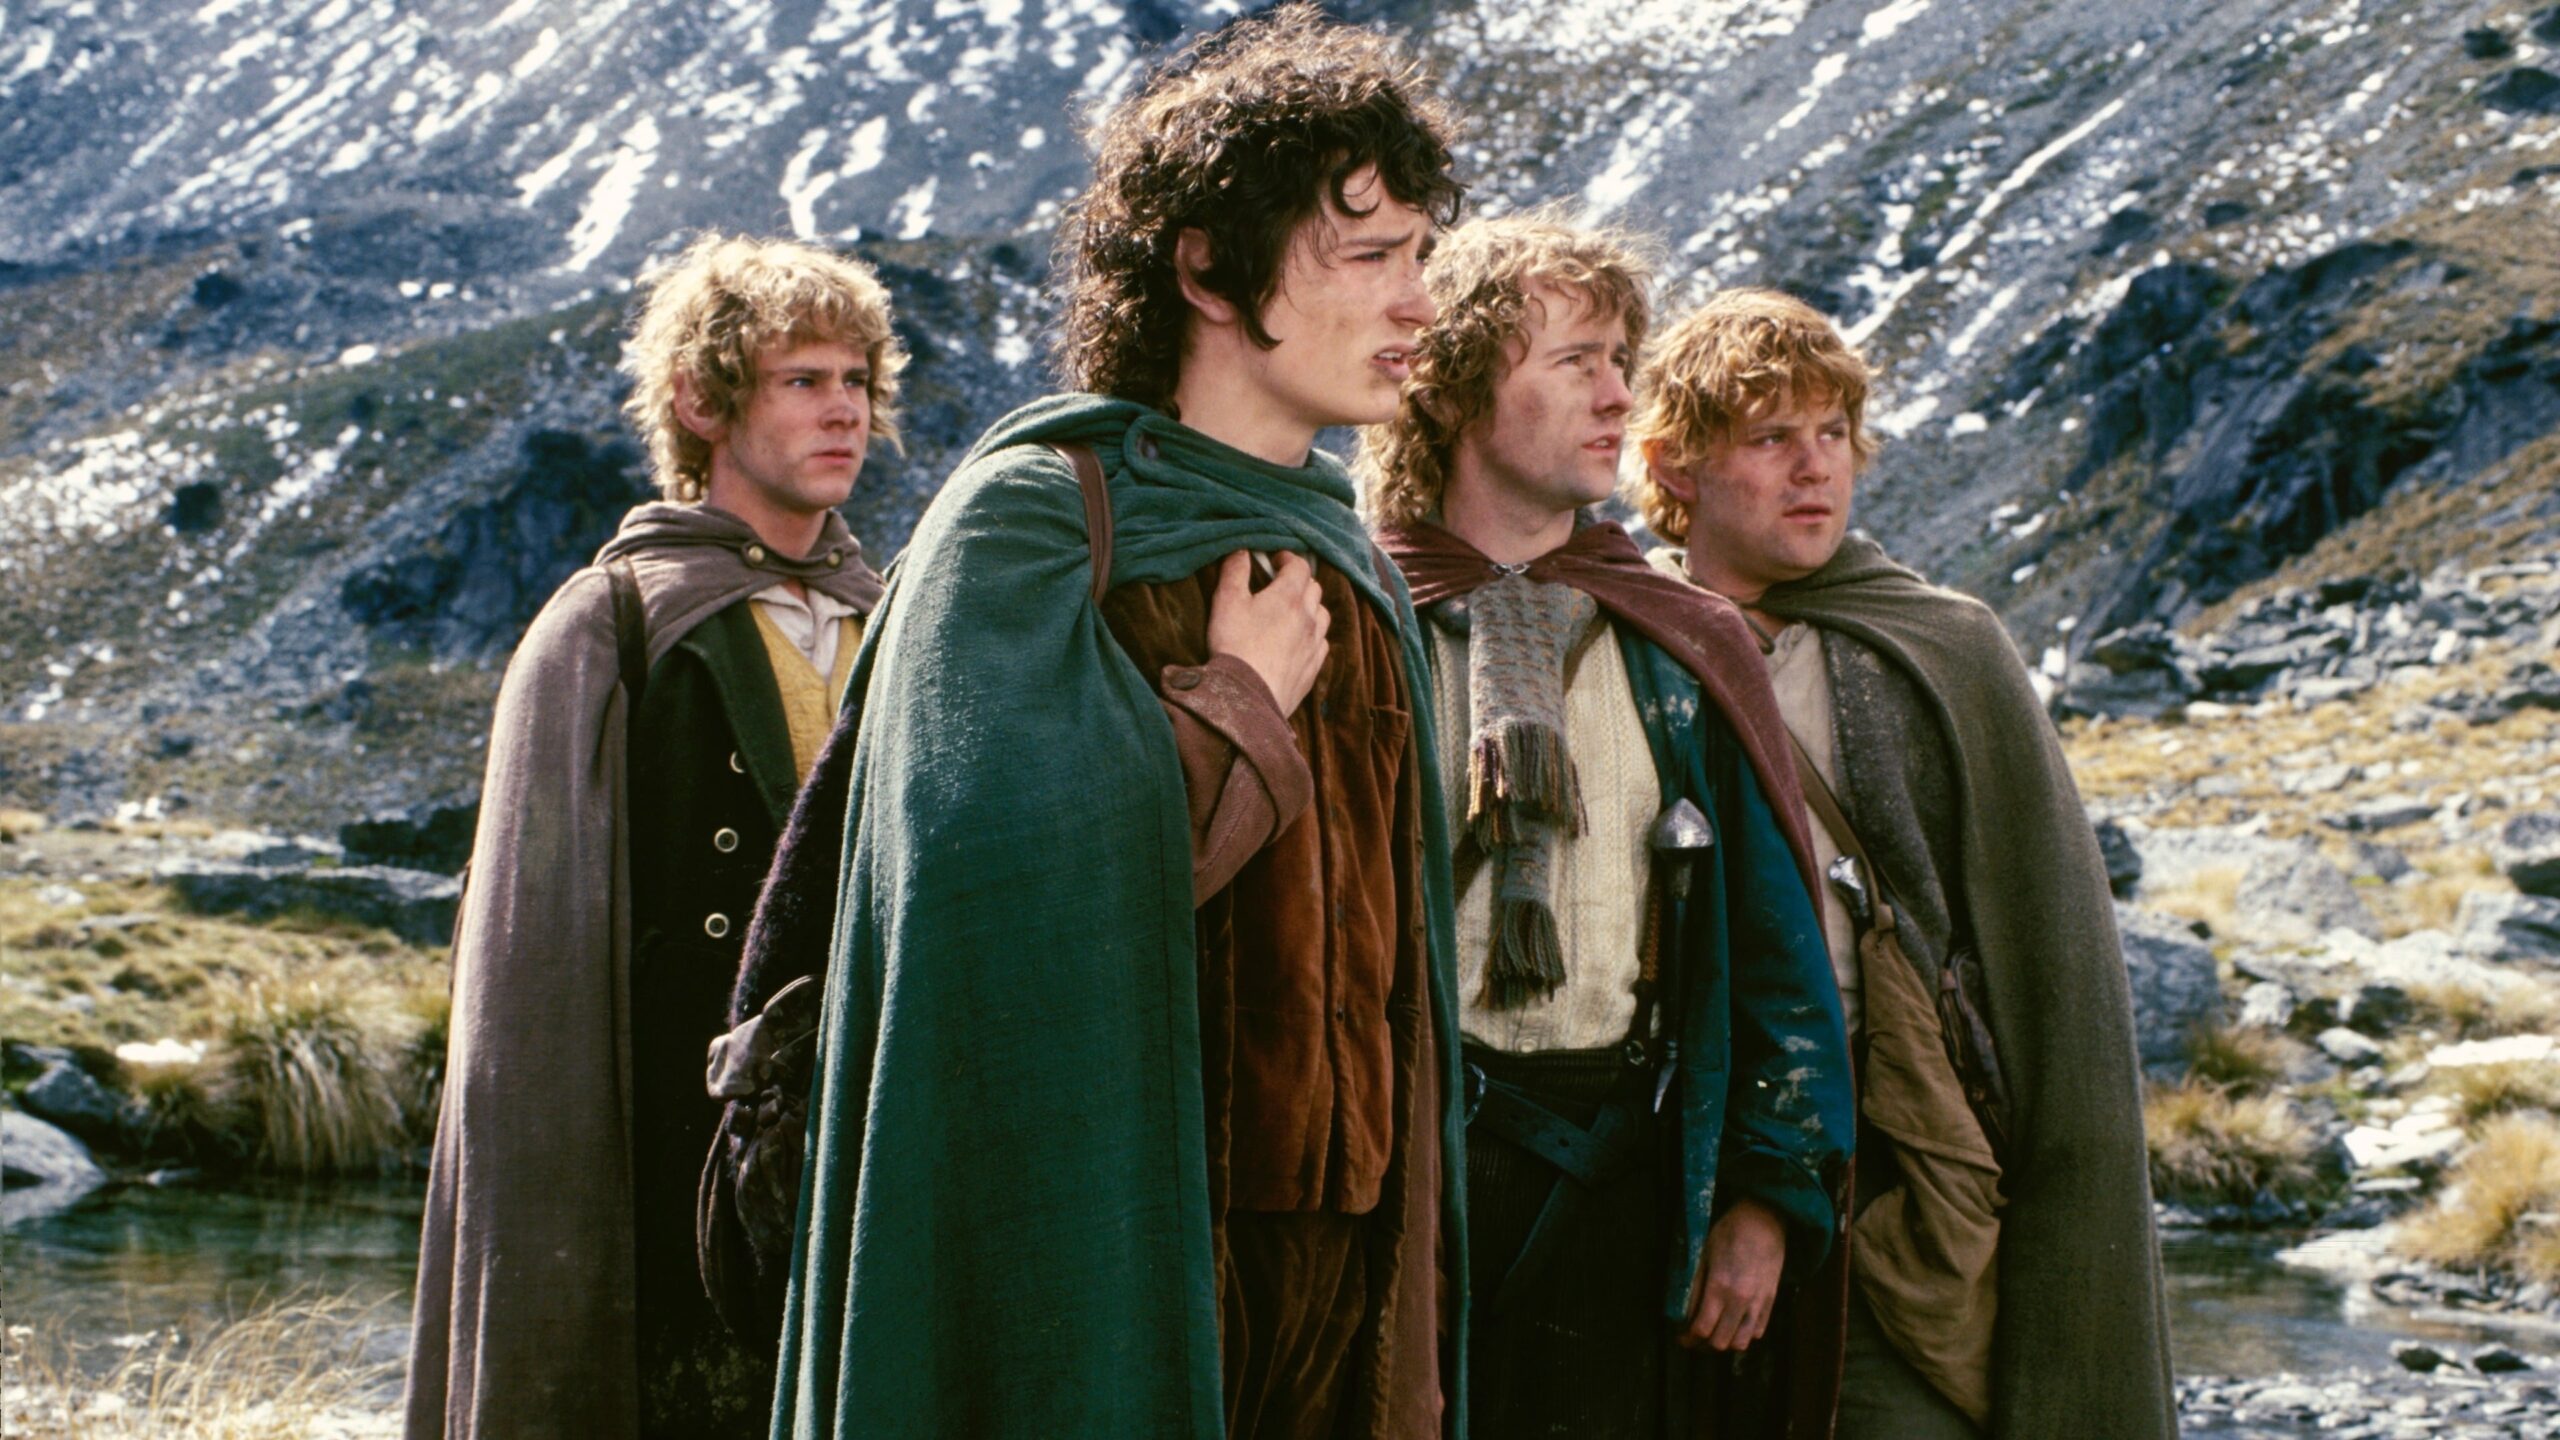 That’s what Frodo actor Elijah Wood says about the new “Lord of the Rings” movies